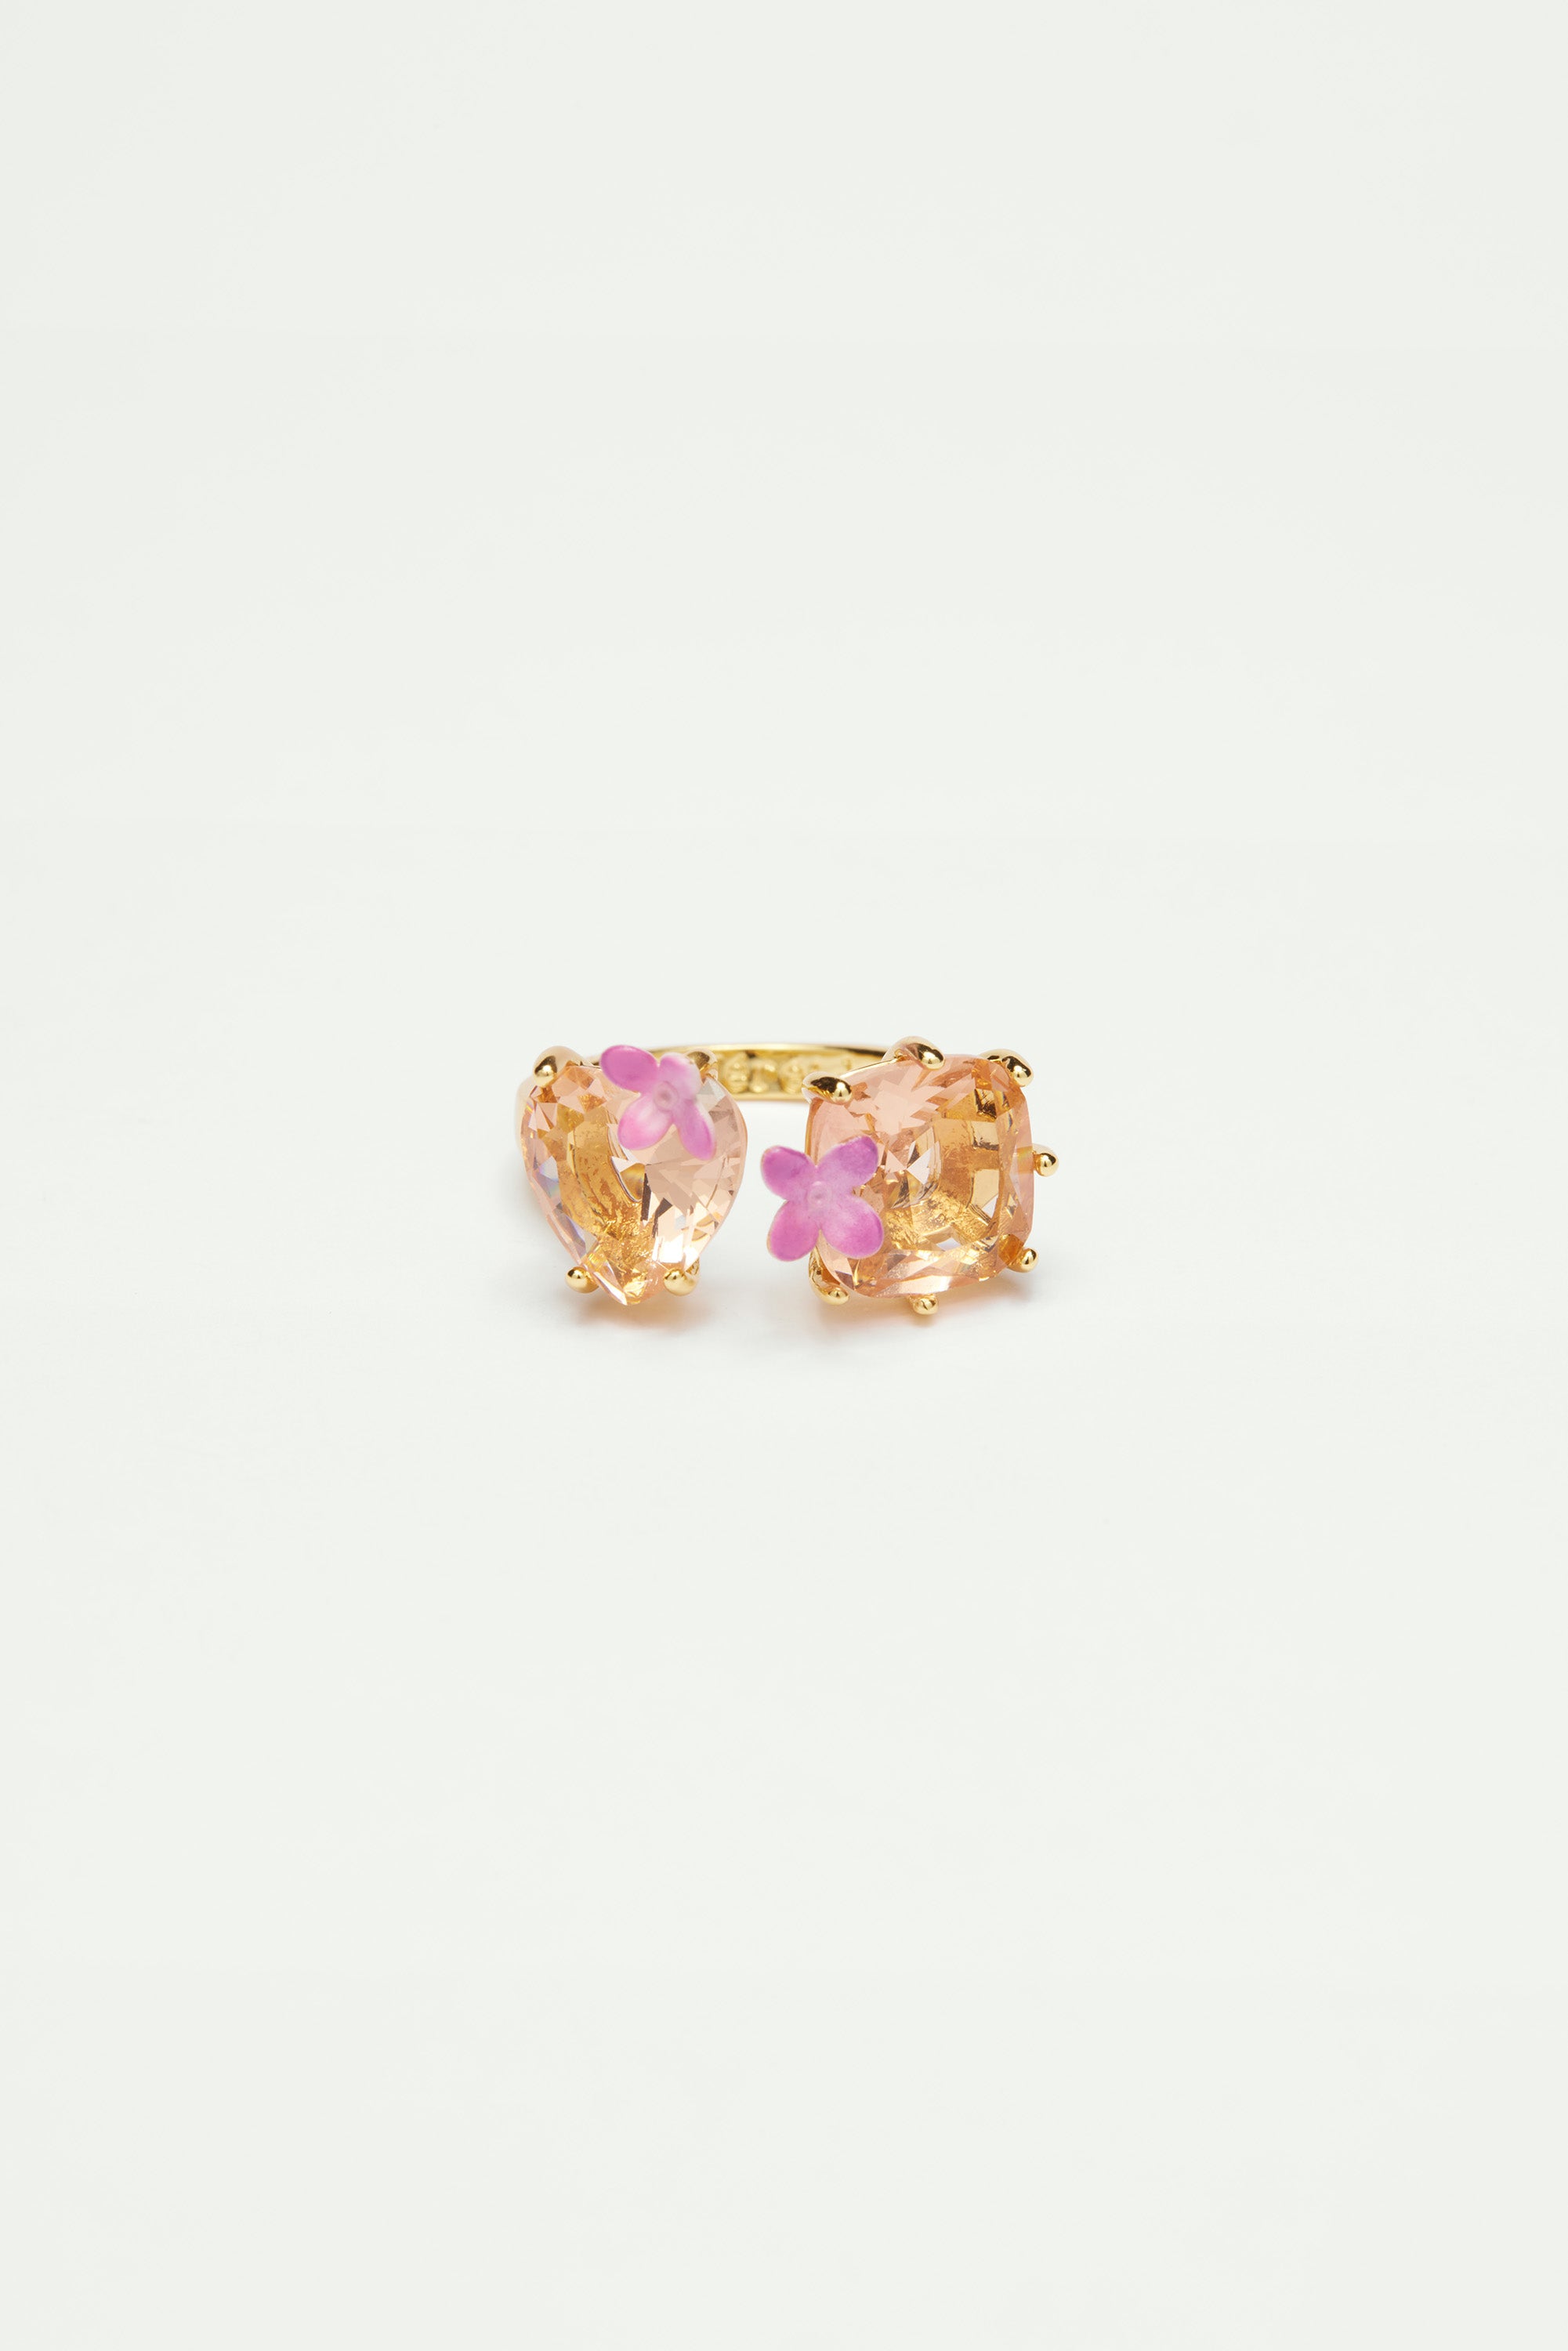 Apricot pink diamantine flower, heart and square stone ring